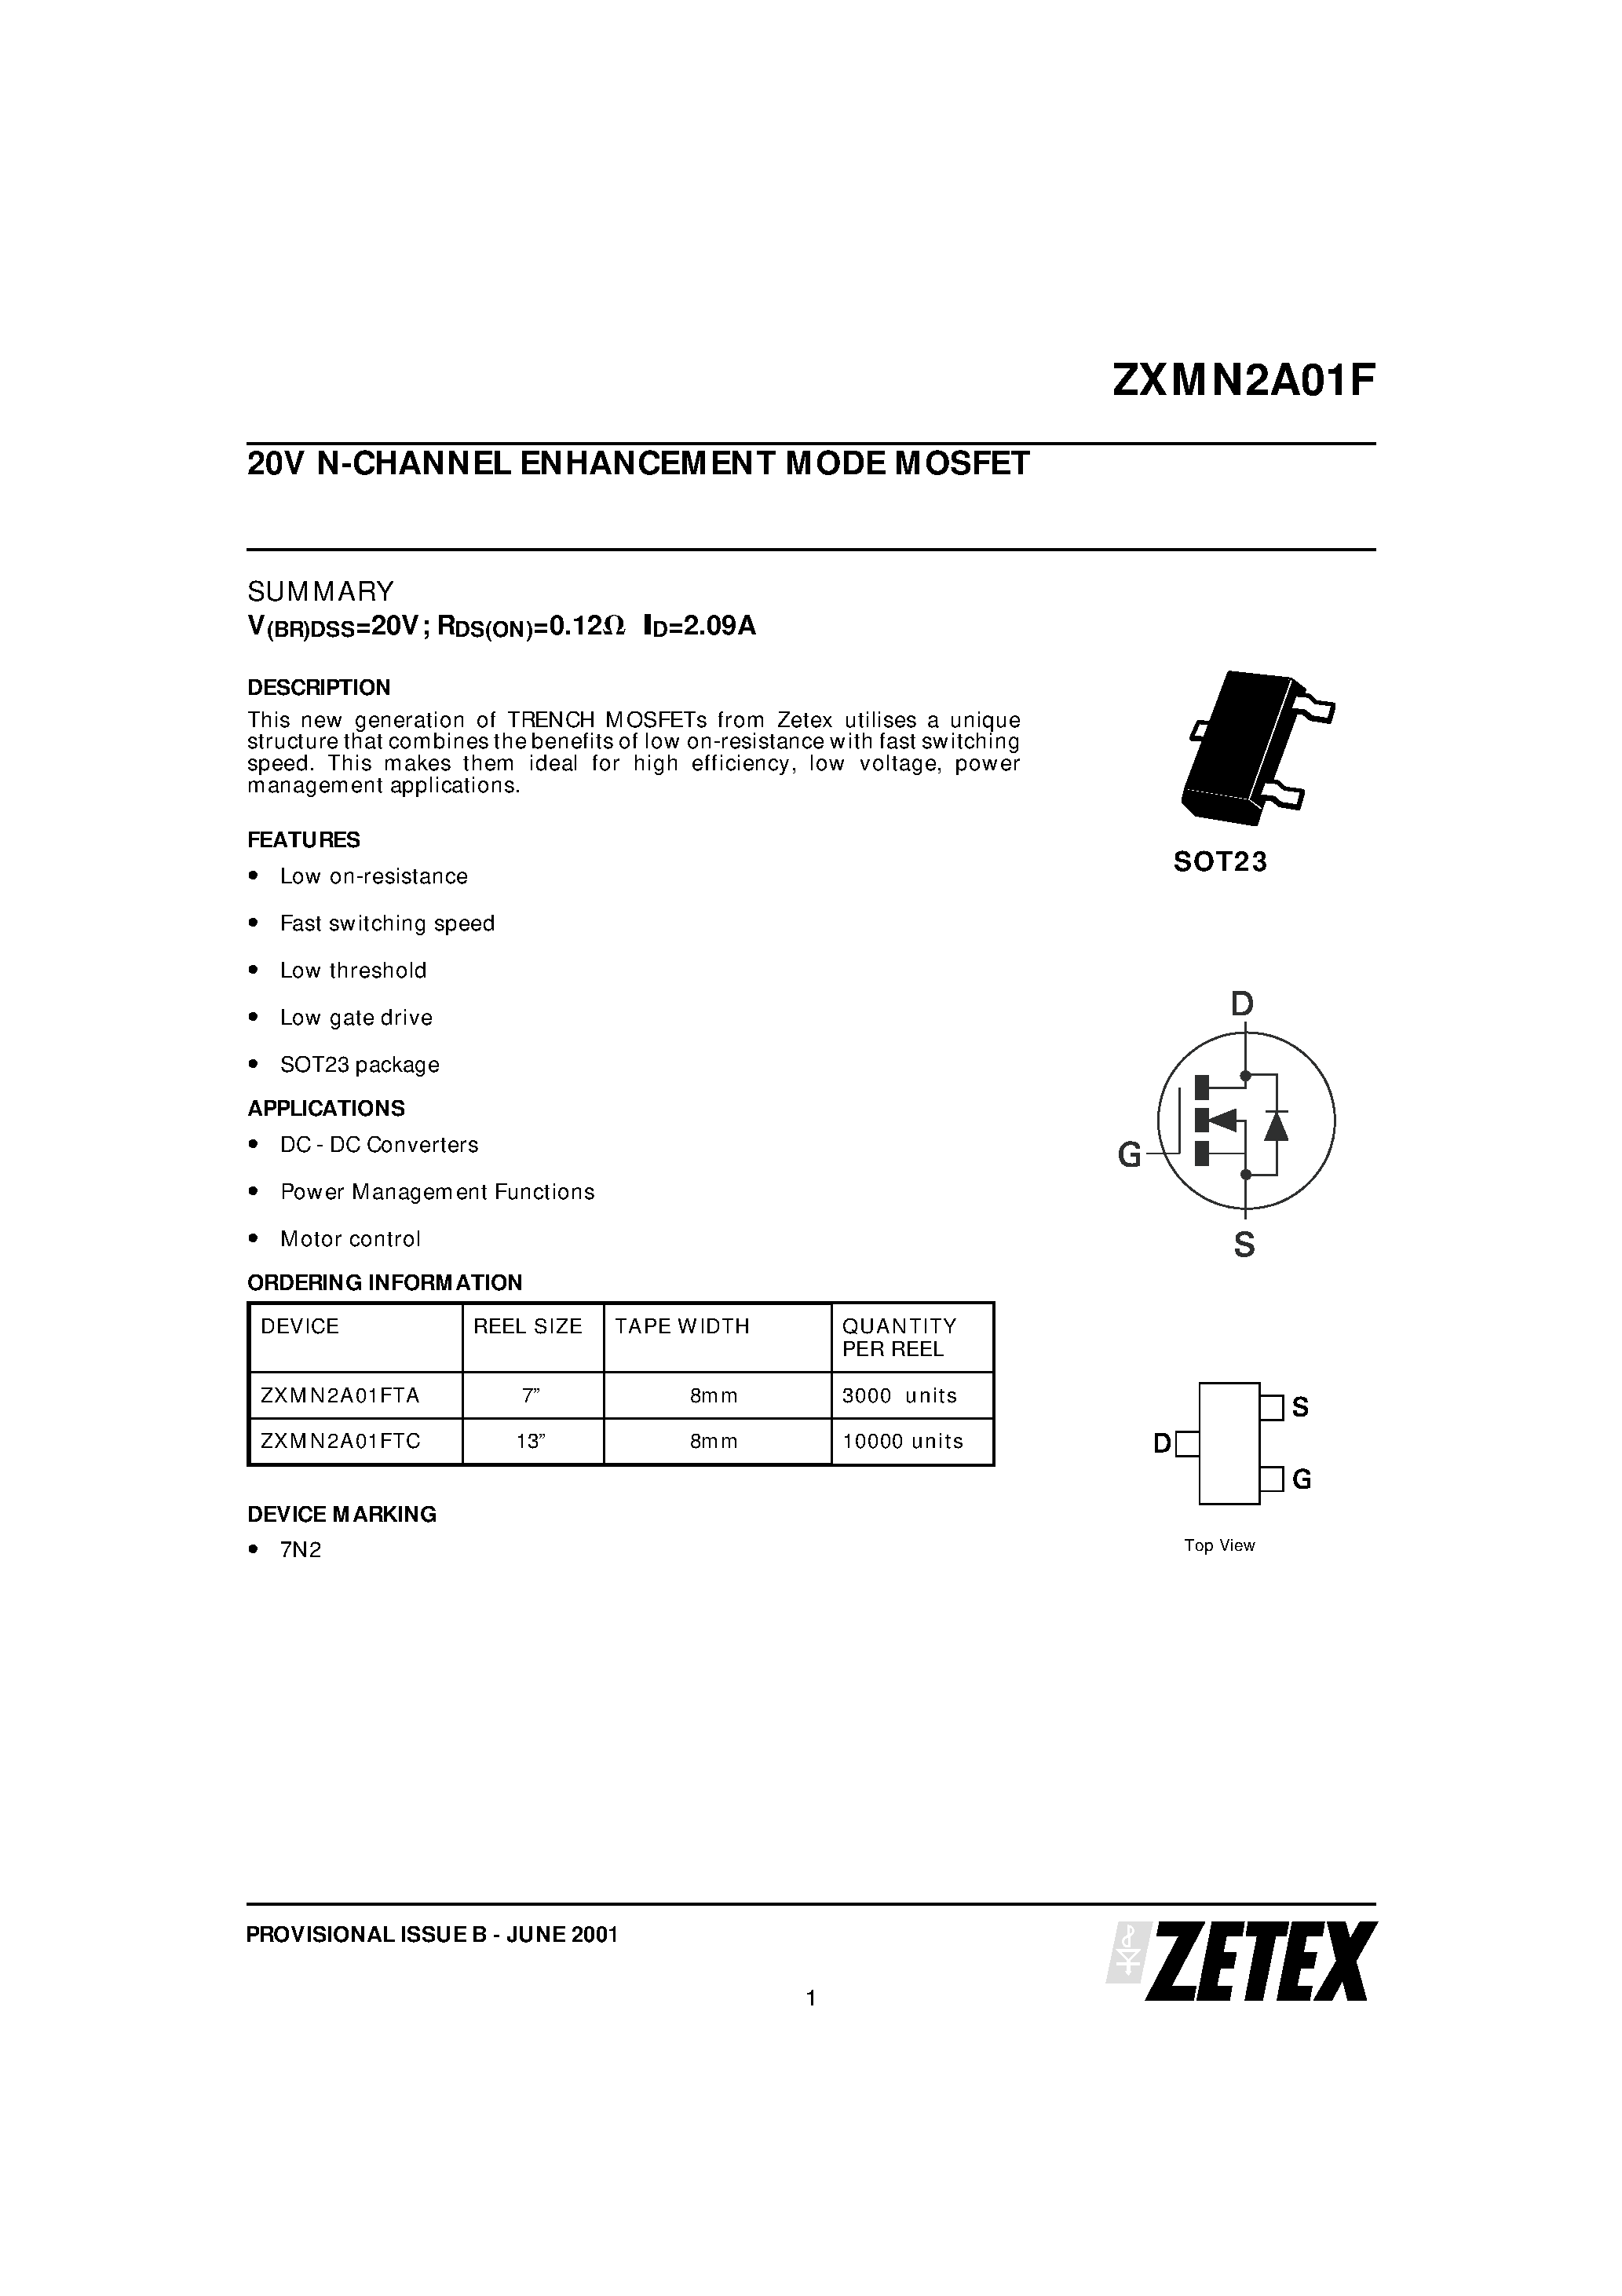 Datasheet ZXMN2A01 - 20V N-CHANNEL ENHANCEMENT MODE MOSFET page 1